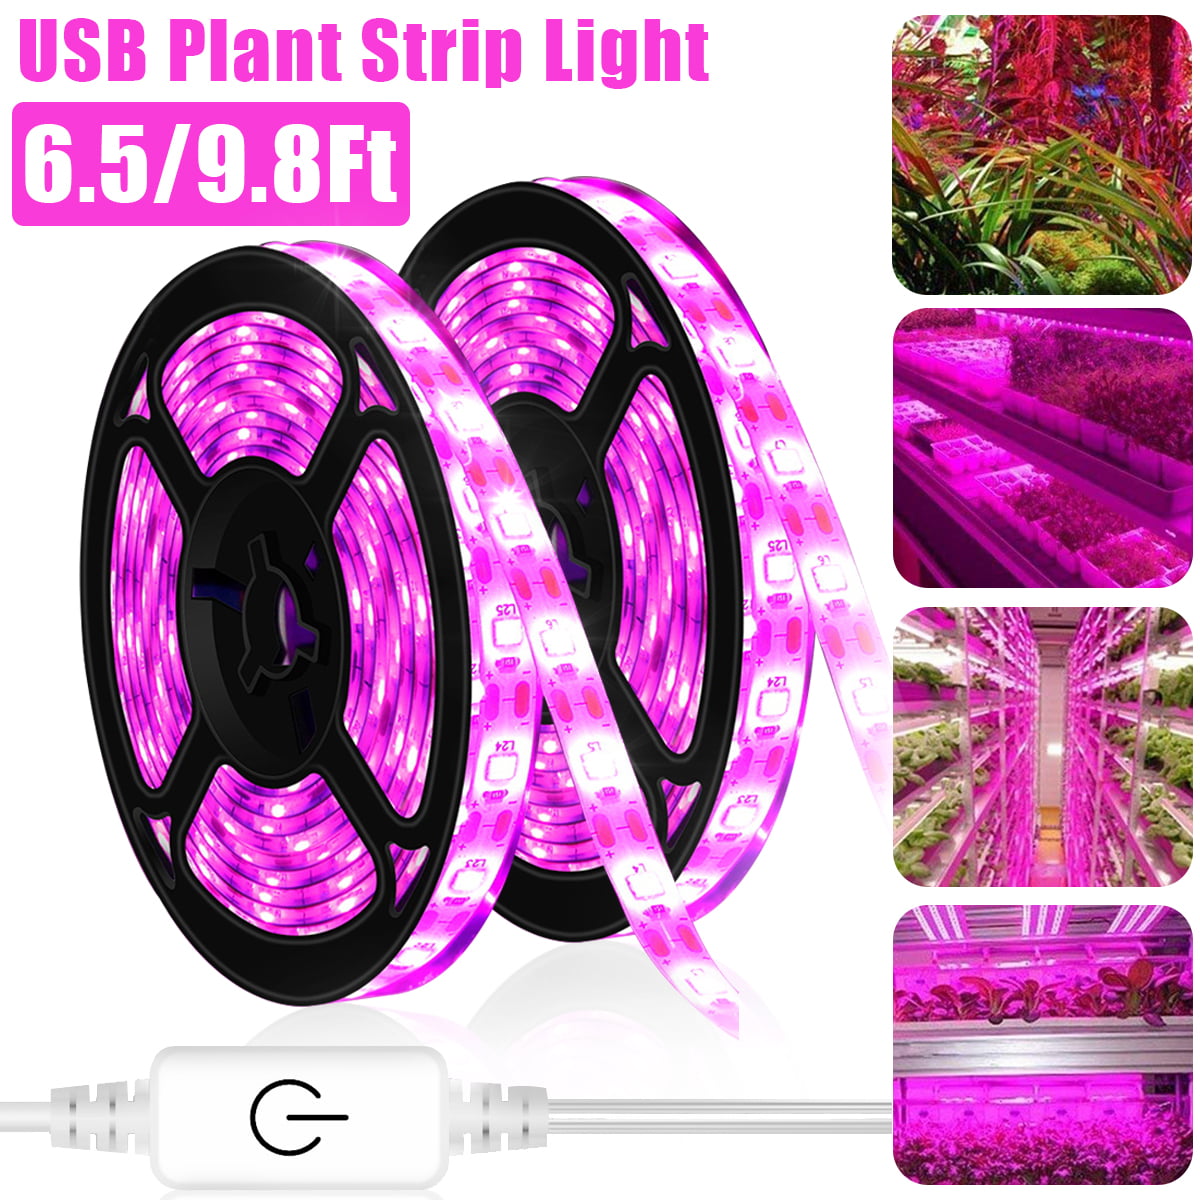 Touch switch LED Waterproof Plant Grow Light Strip USB Full Spectrum Hydroponic